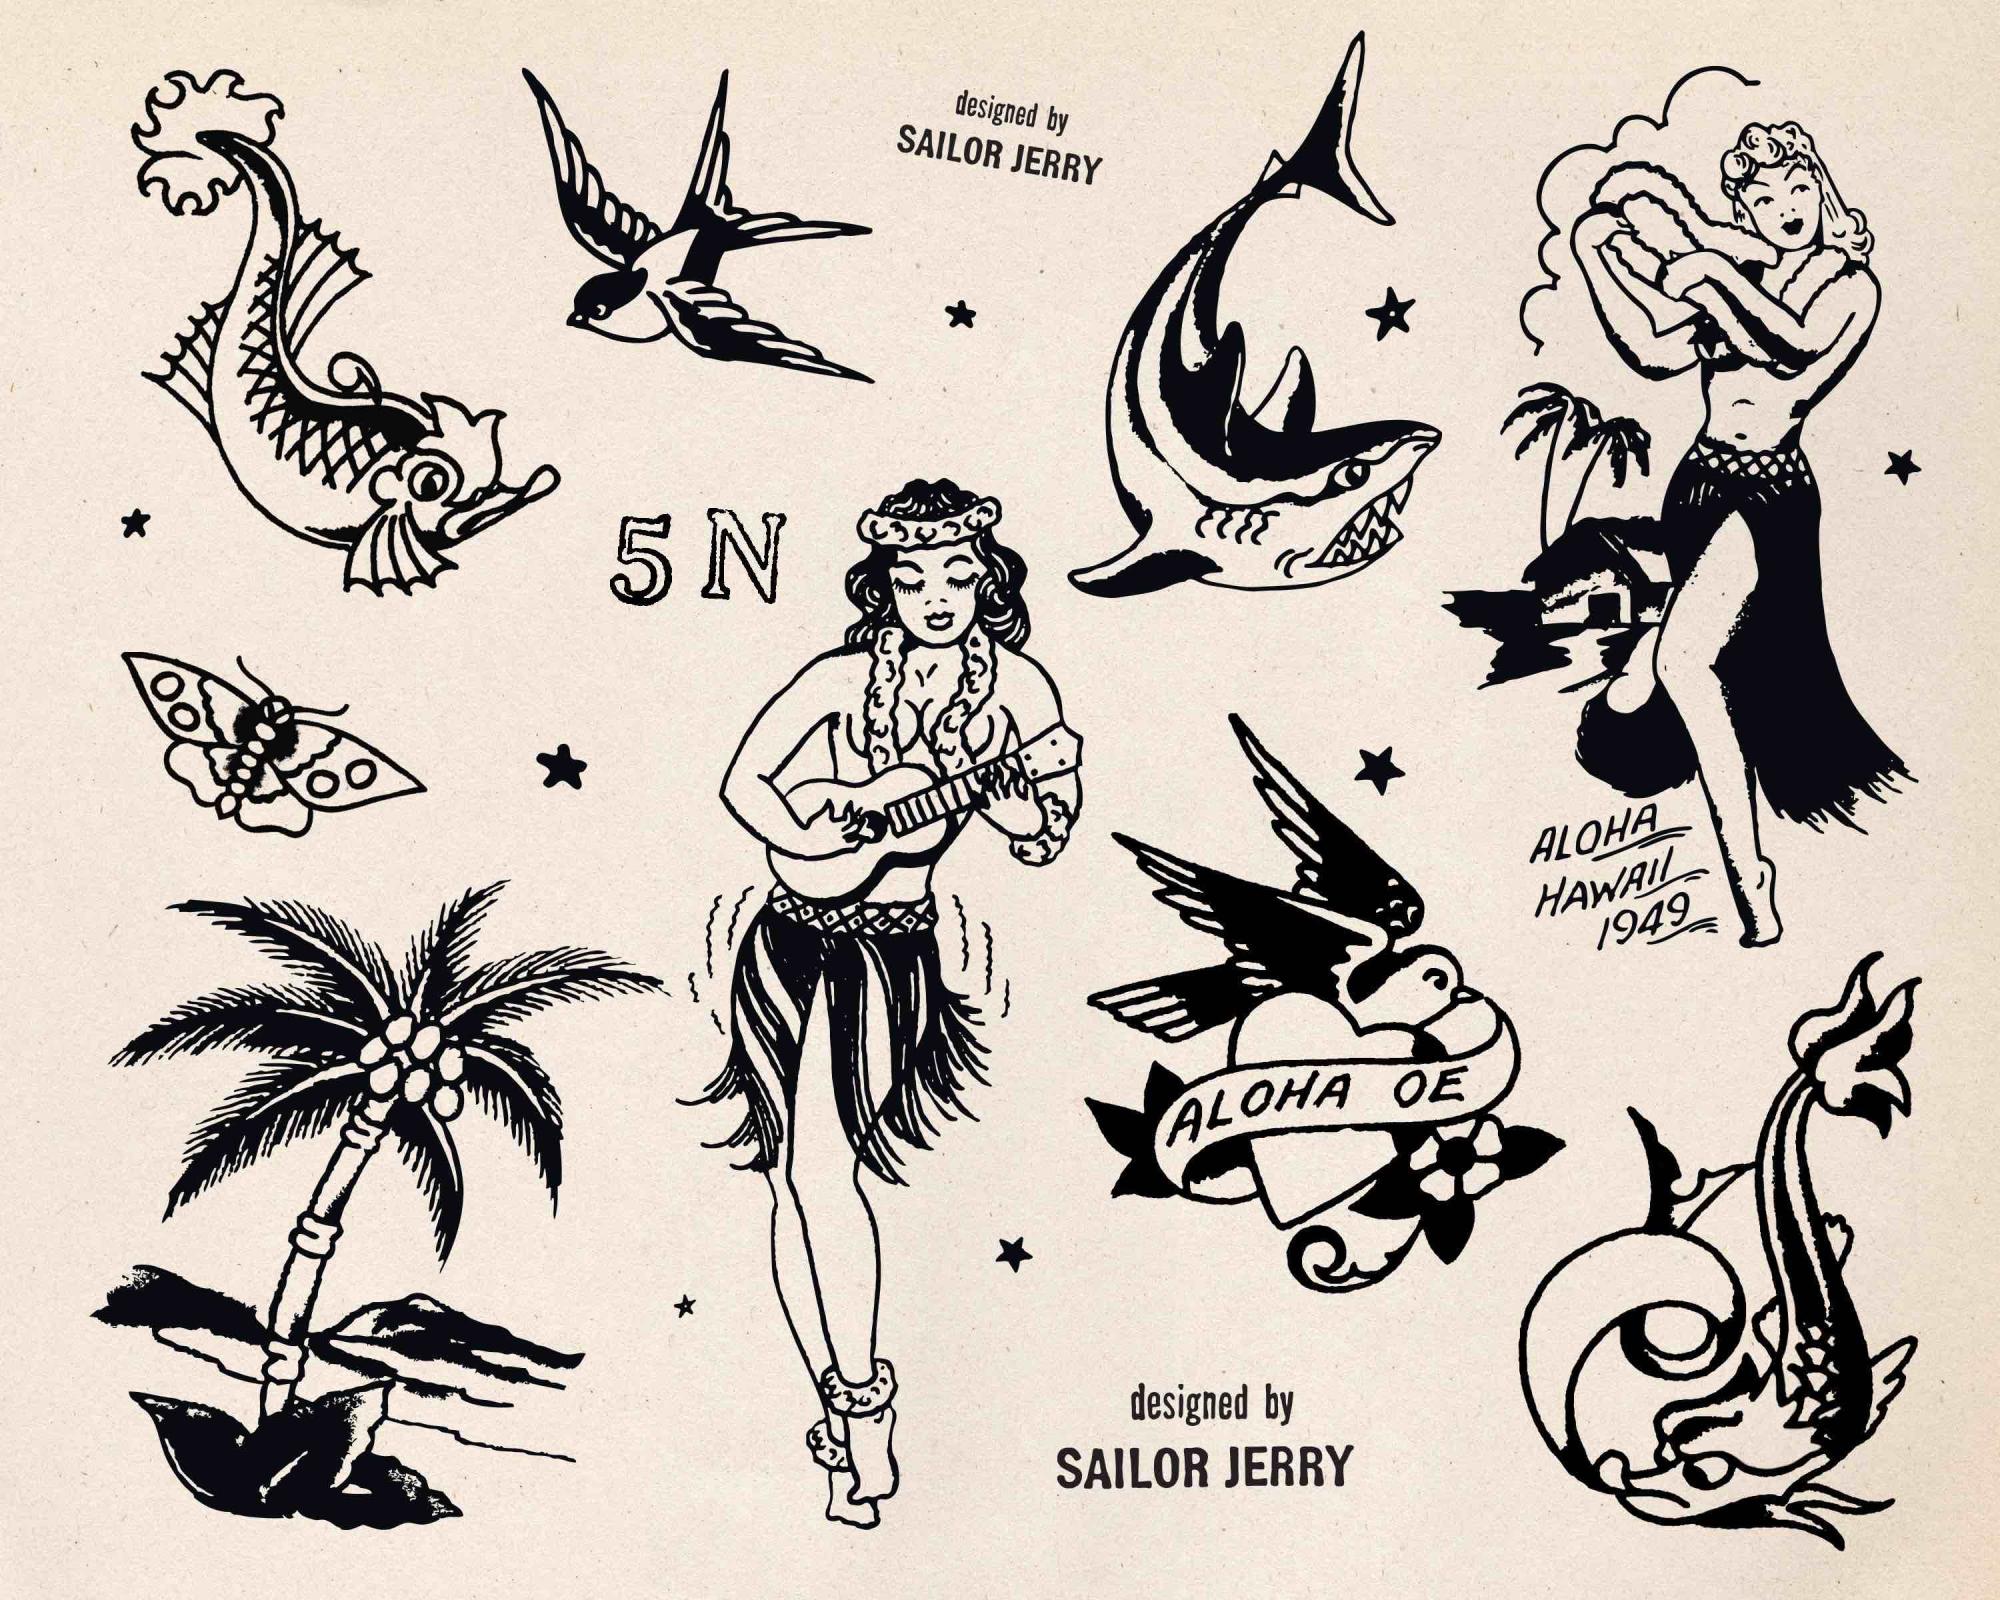 Travels Through Tattoo and American History in Sailor Jerrys Hawaii   HuffPost Life